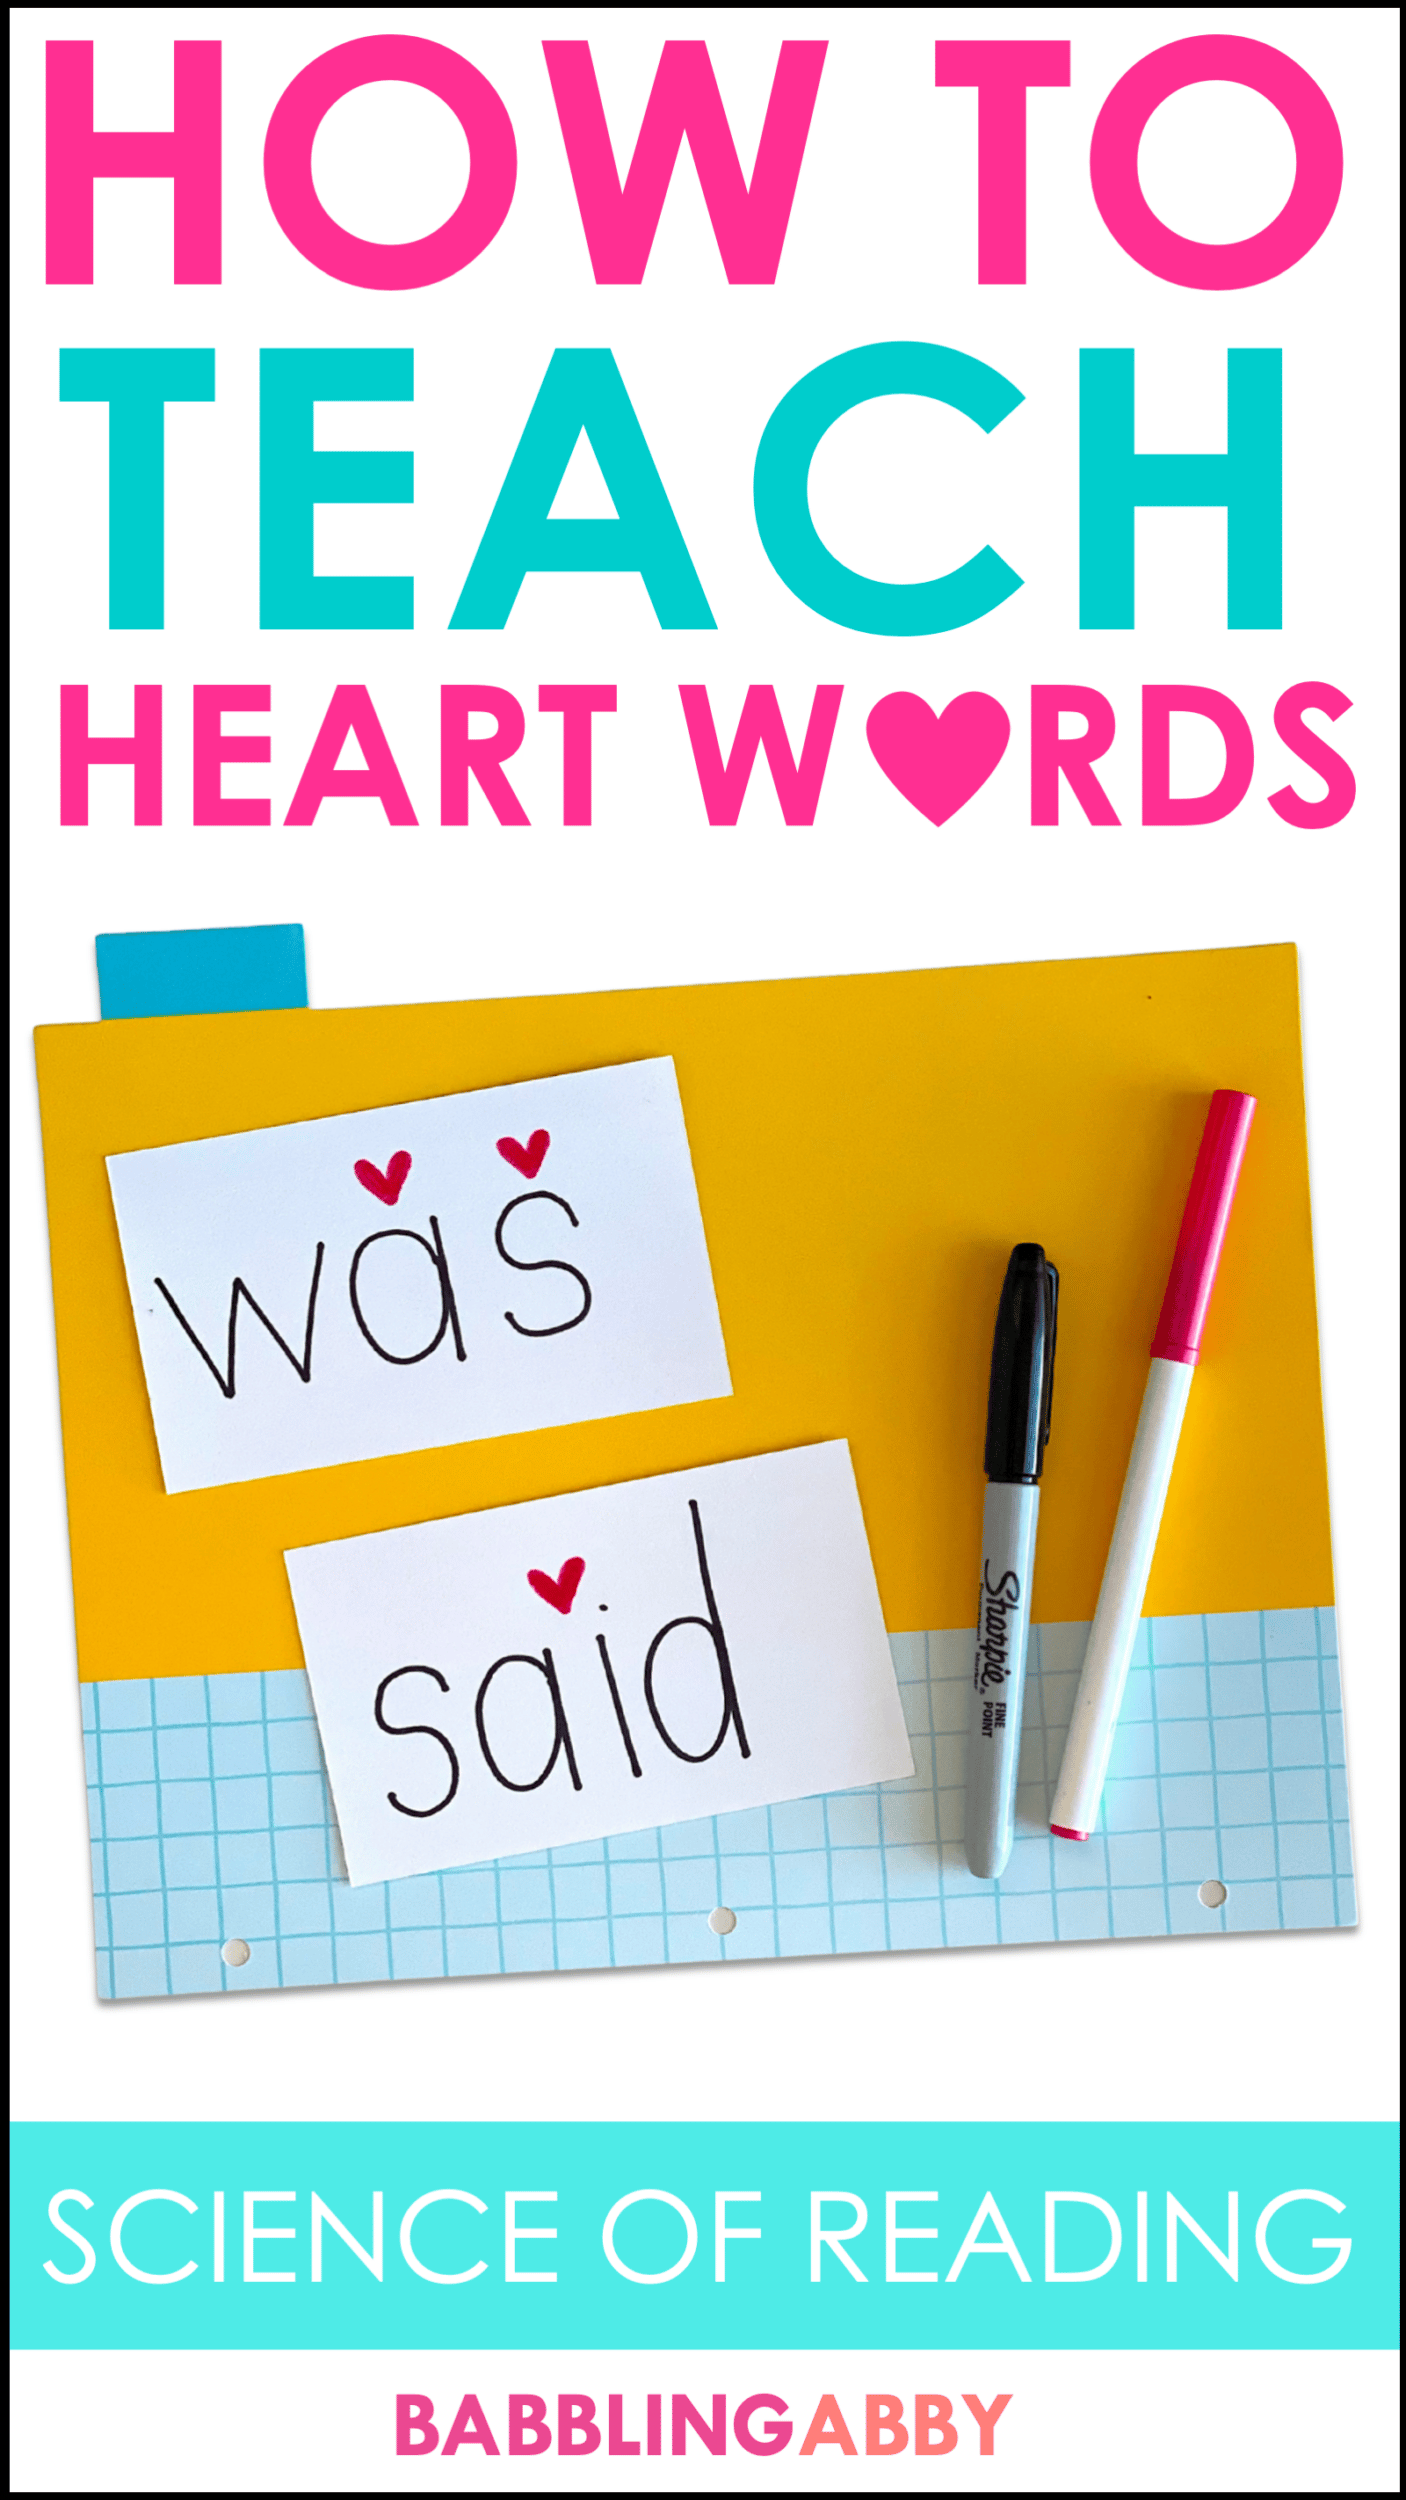 Are you looking for ways to teach heart words? This post explains how some high frequency words are heart words, along with strategies for teaching about them.